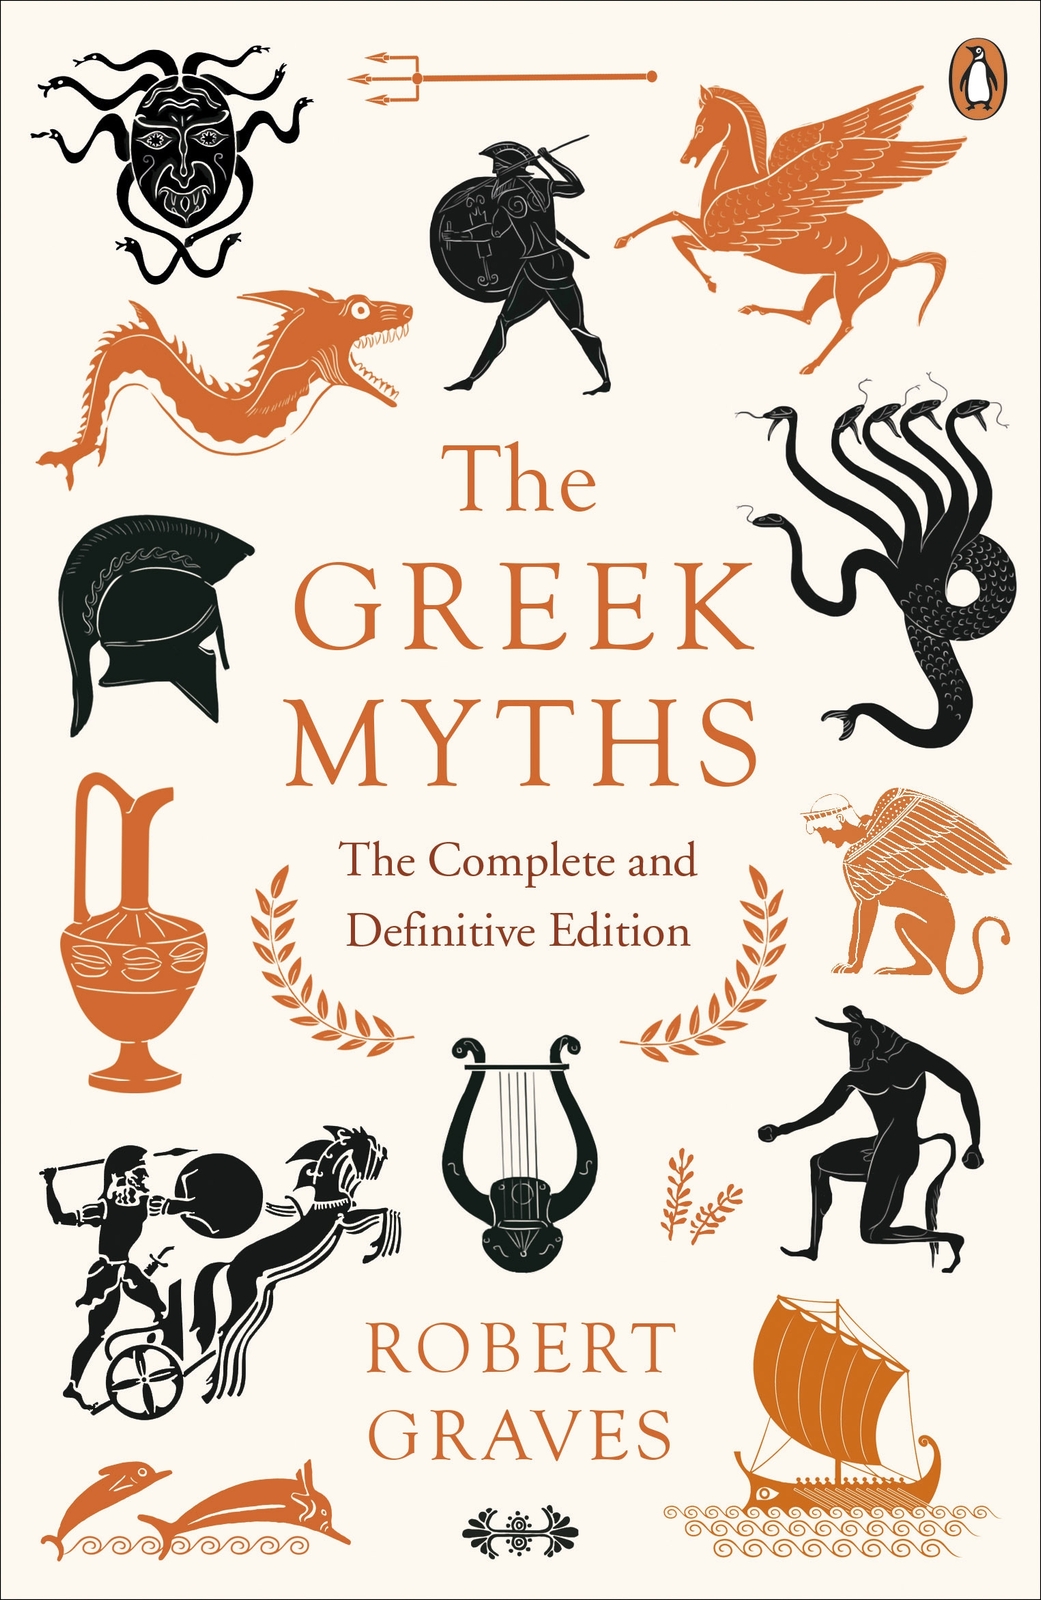 Contents Robert Graves THE GREEK MYTHS The Complete and Definitive Edition - photo 1